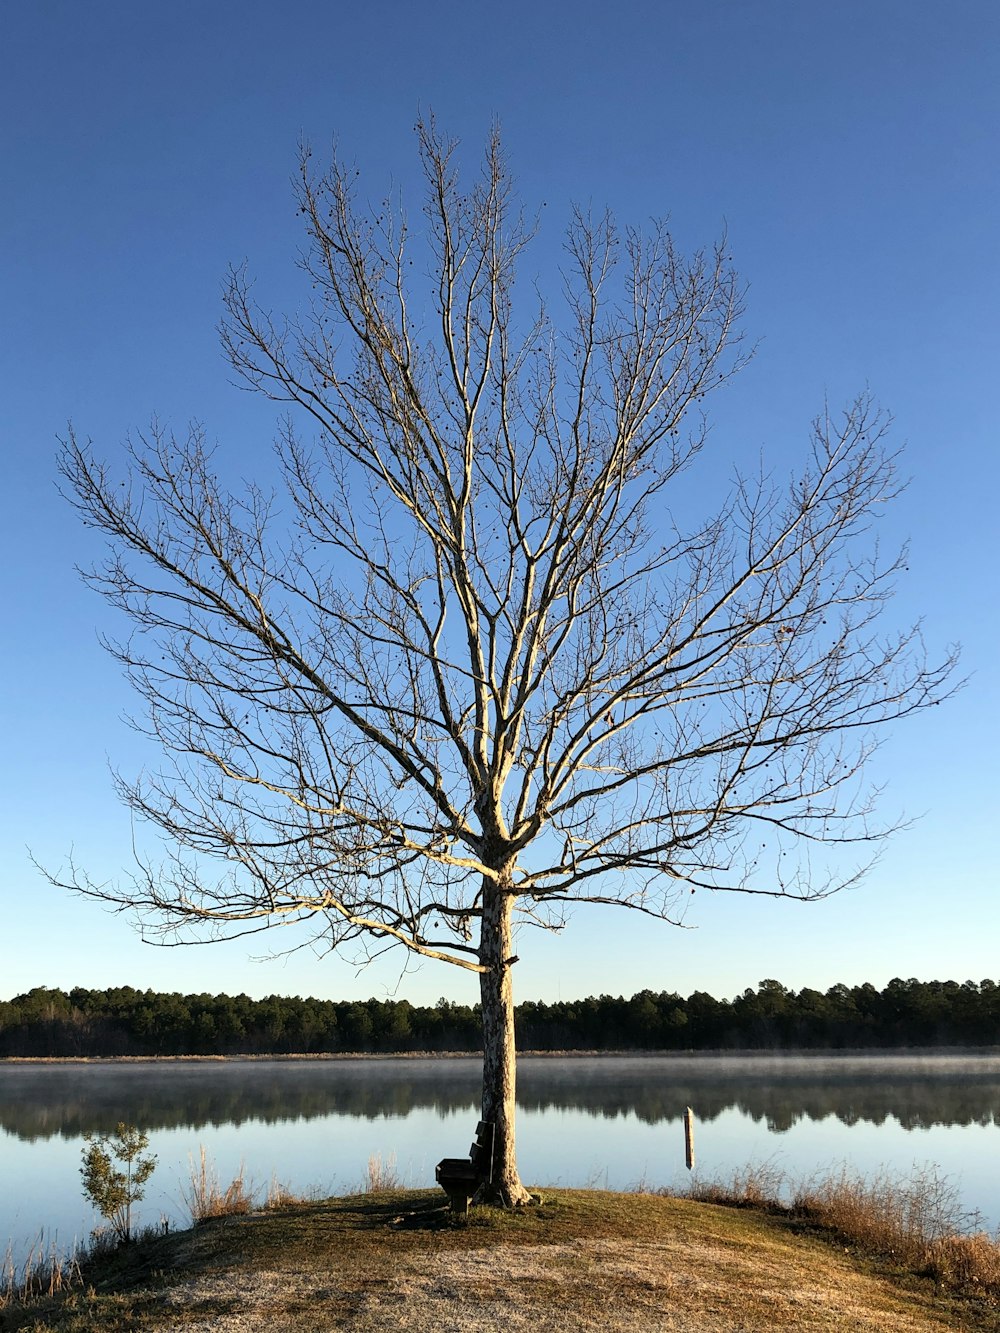 a tree with no leaves near a body of water